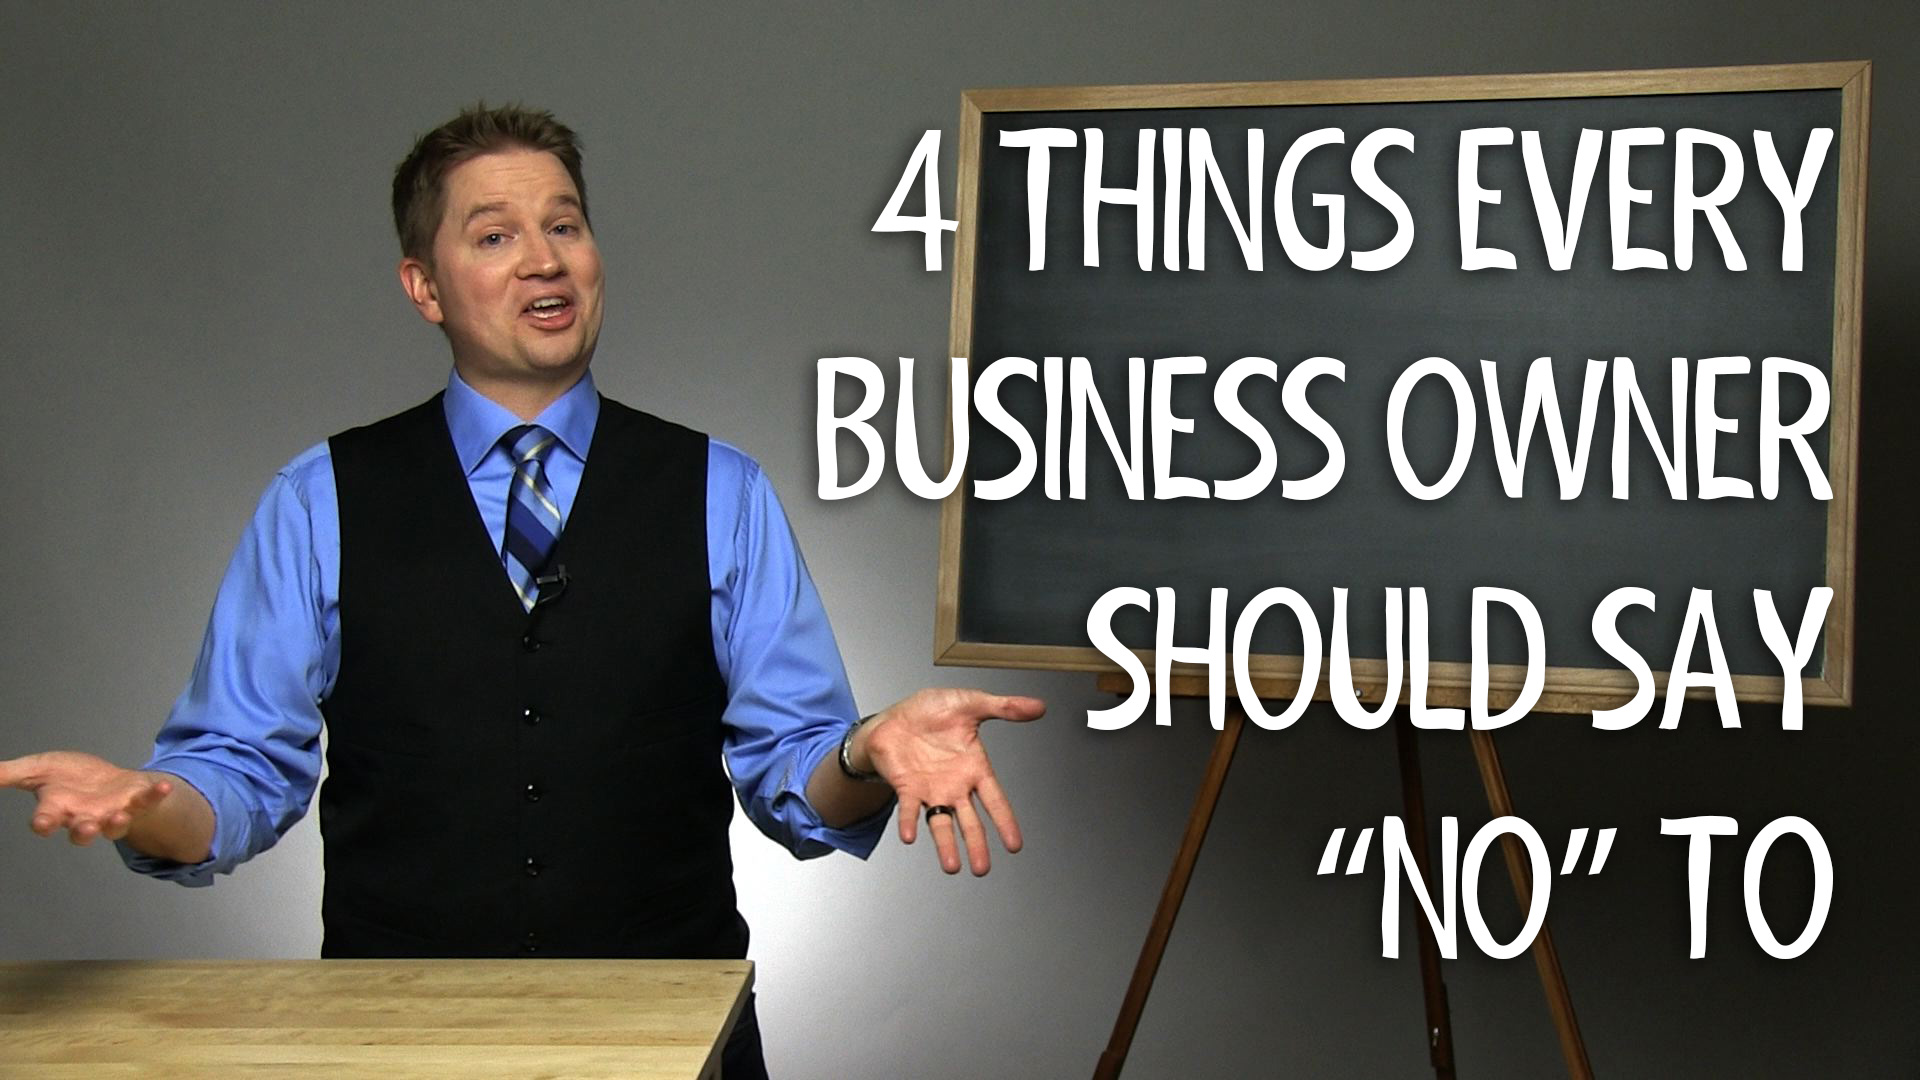 4 Things Every Business Owner Should Say “No” To